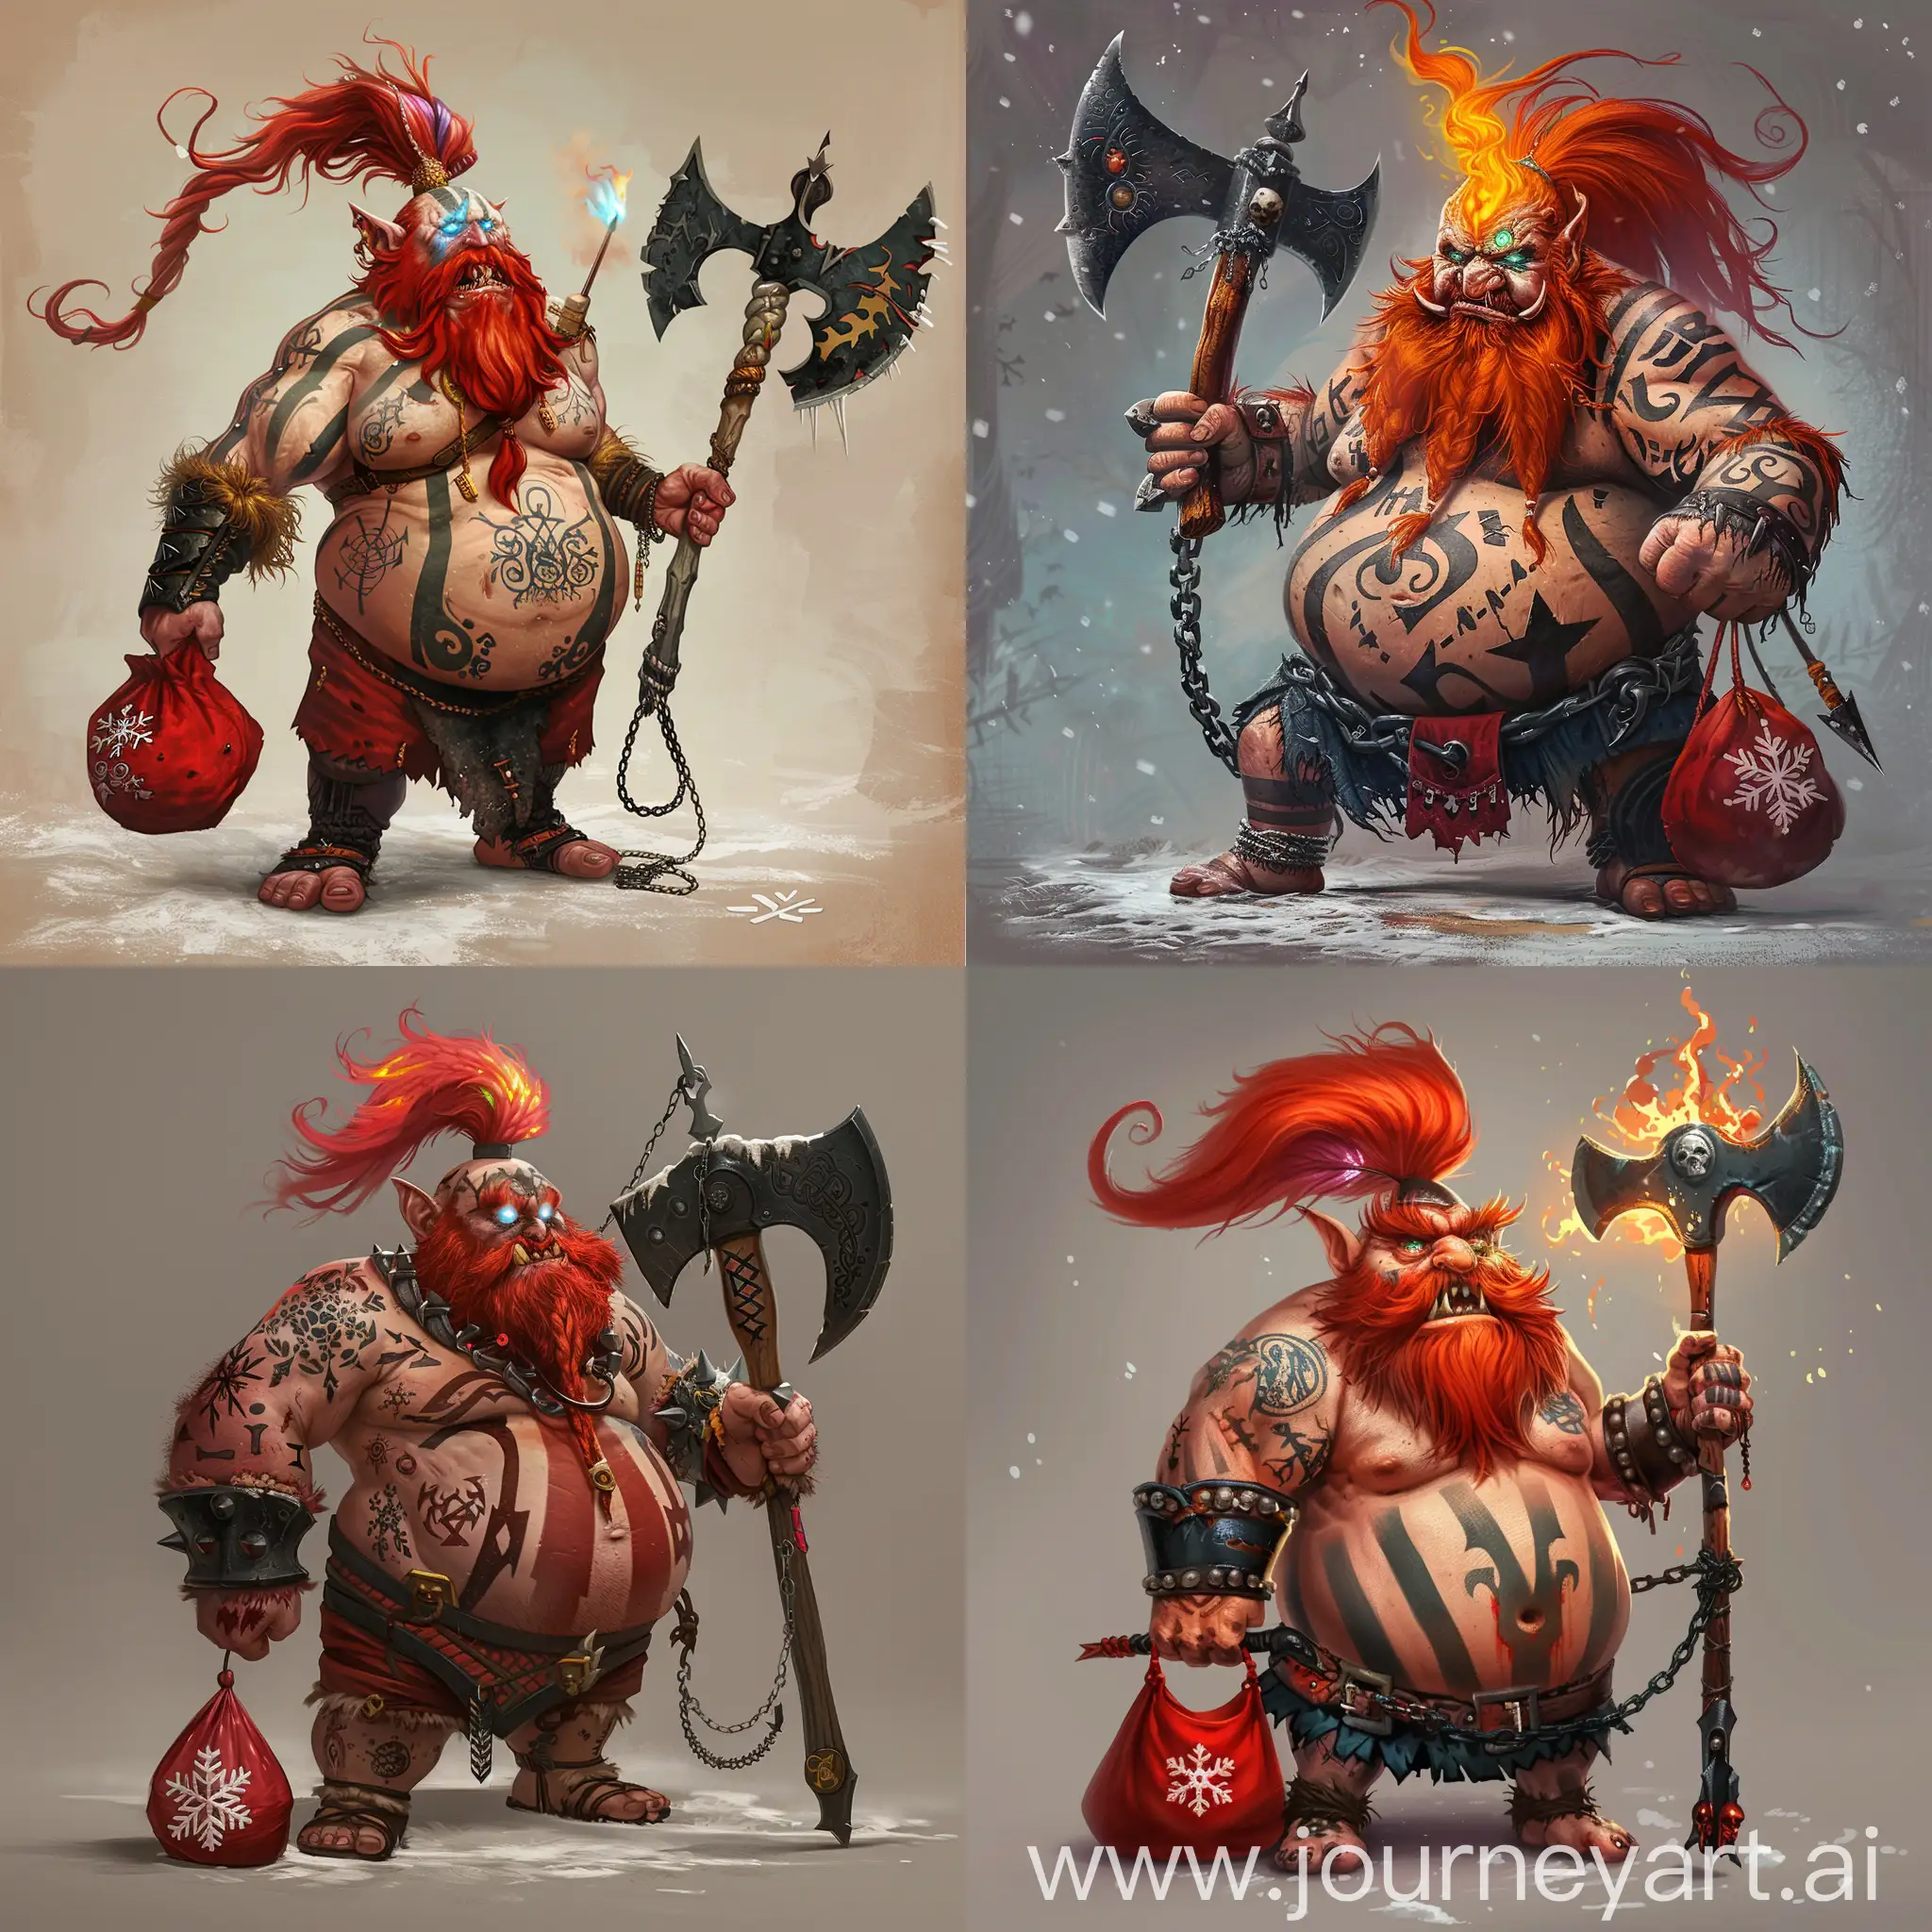 Fierce-Kindness-RedHaired-Barbarian-Dwarf-with-Magic-Bag-and-Axe